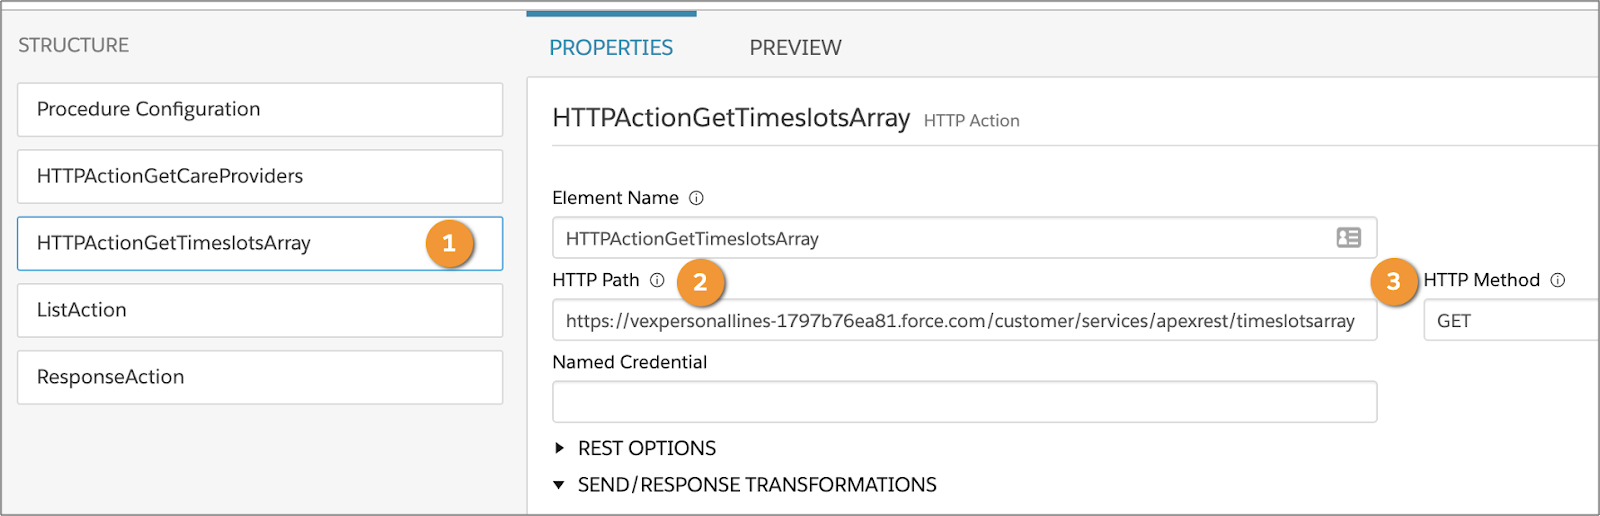 Discover List Actions Salesforce Trailhead 6577